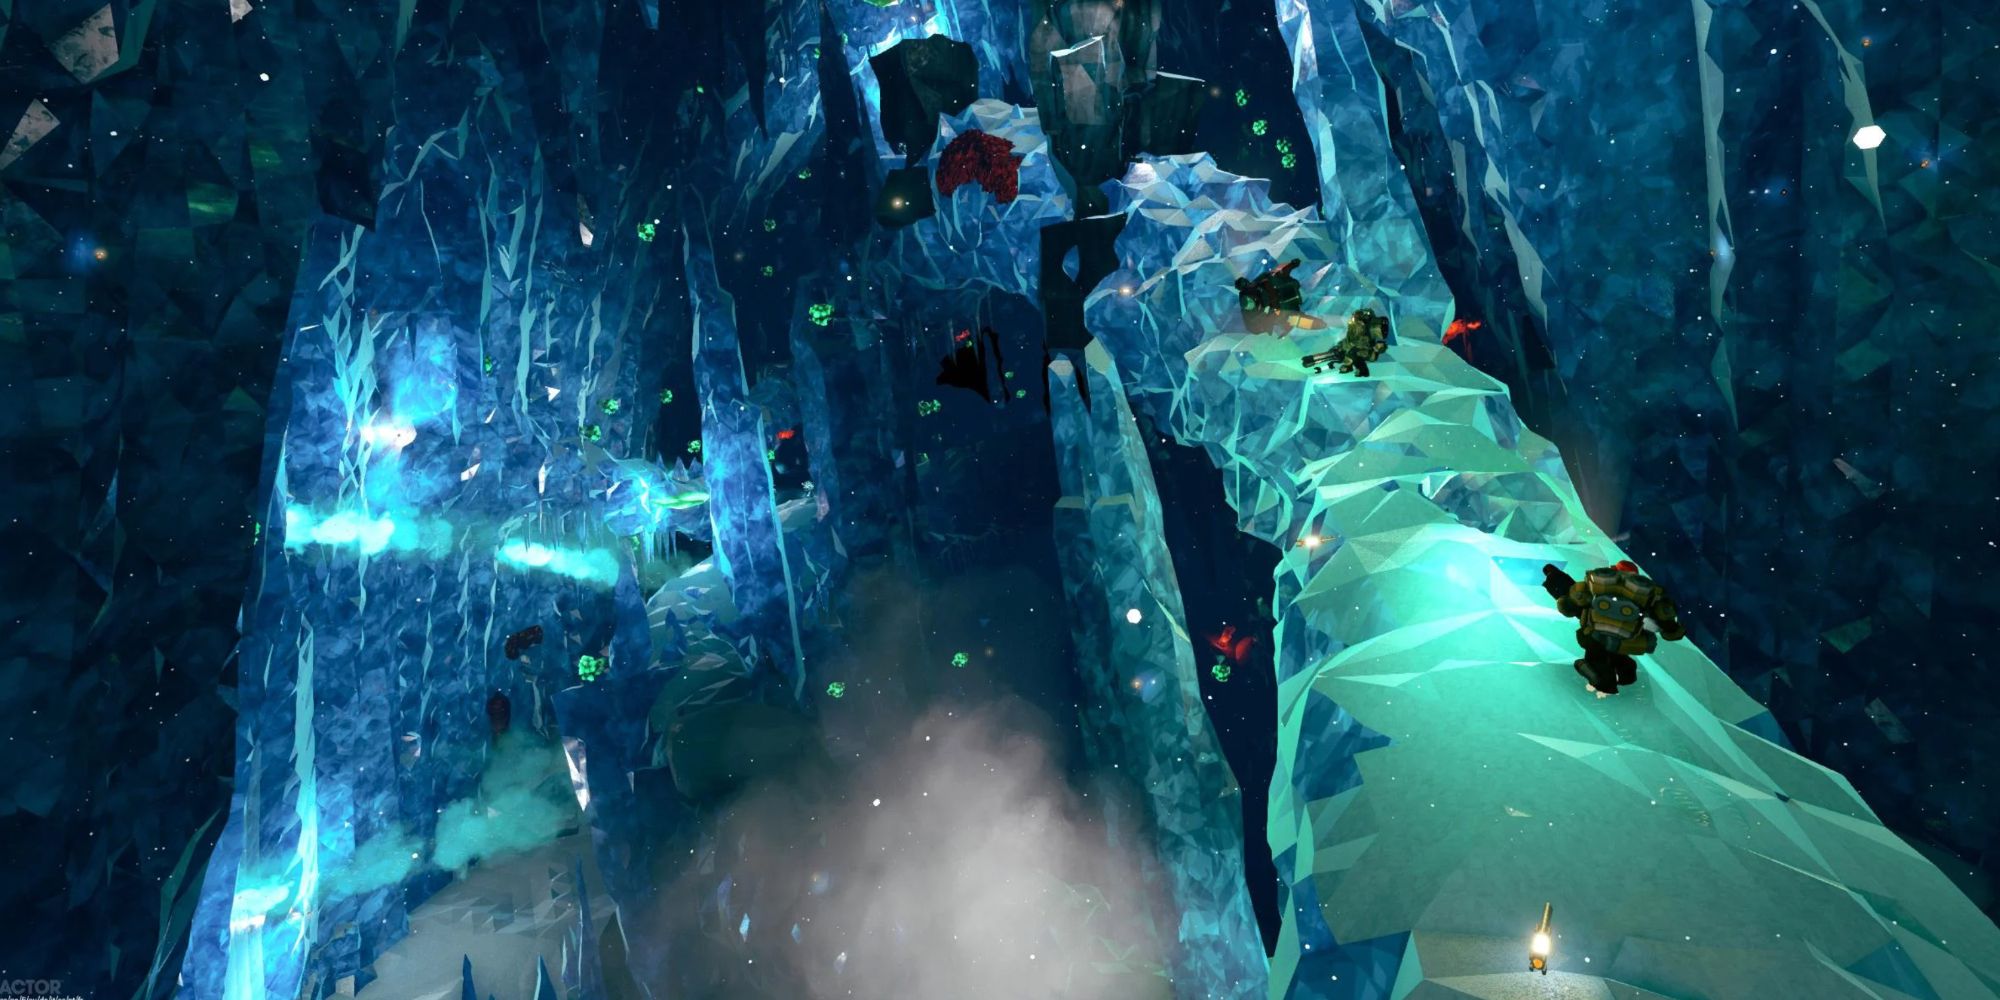 Characters walking up ice bridge in a cave in the Glacial Strata biome in Deep Rock Galactic